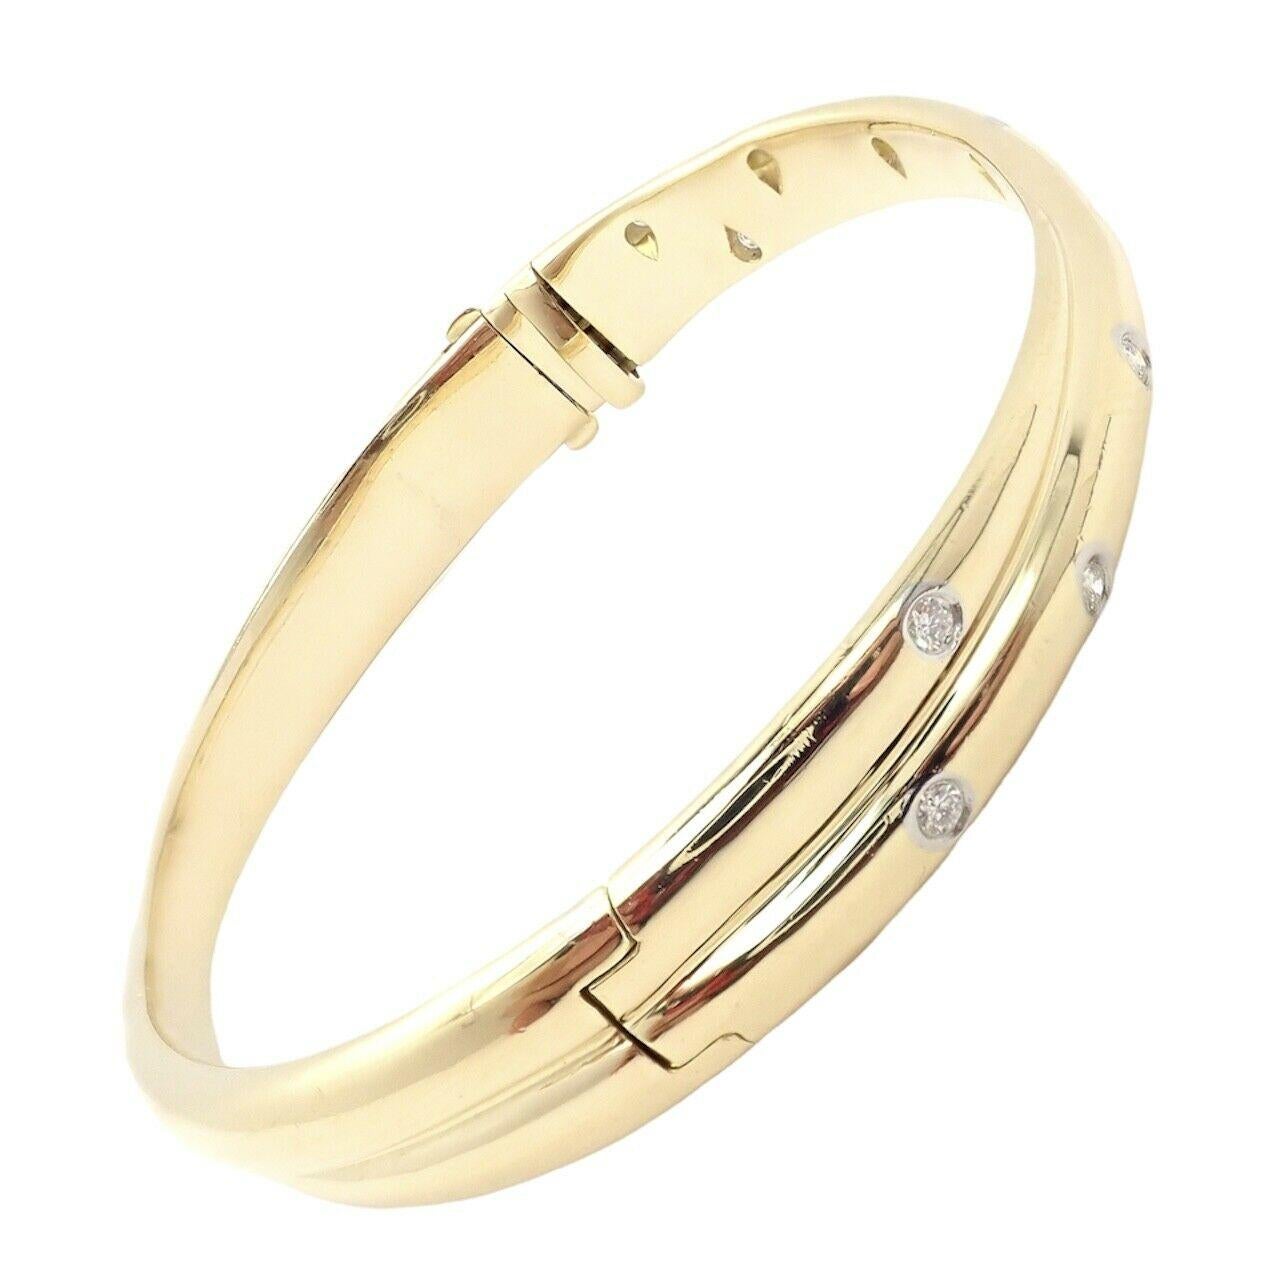 Platinum And 18k Yellow Gold Diamond Etiole Crossover Bangle Bracelet by Tiffany & Co.  
With 10 round brilliant cut diamonds VS1 clarity, E color total weight 
approx. .50ctw

Details:  
Weight: 40.8 grams
Length: 6 3/4